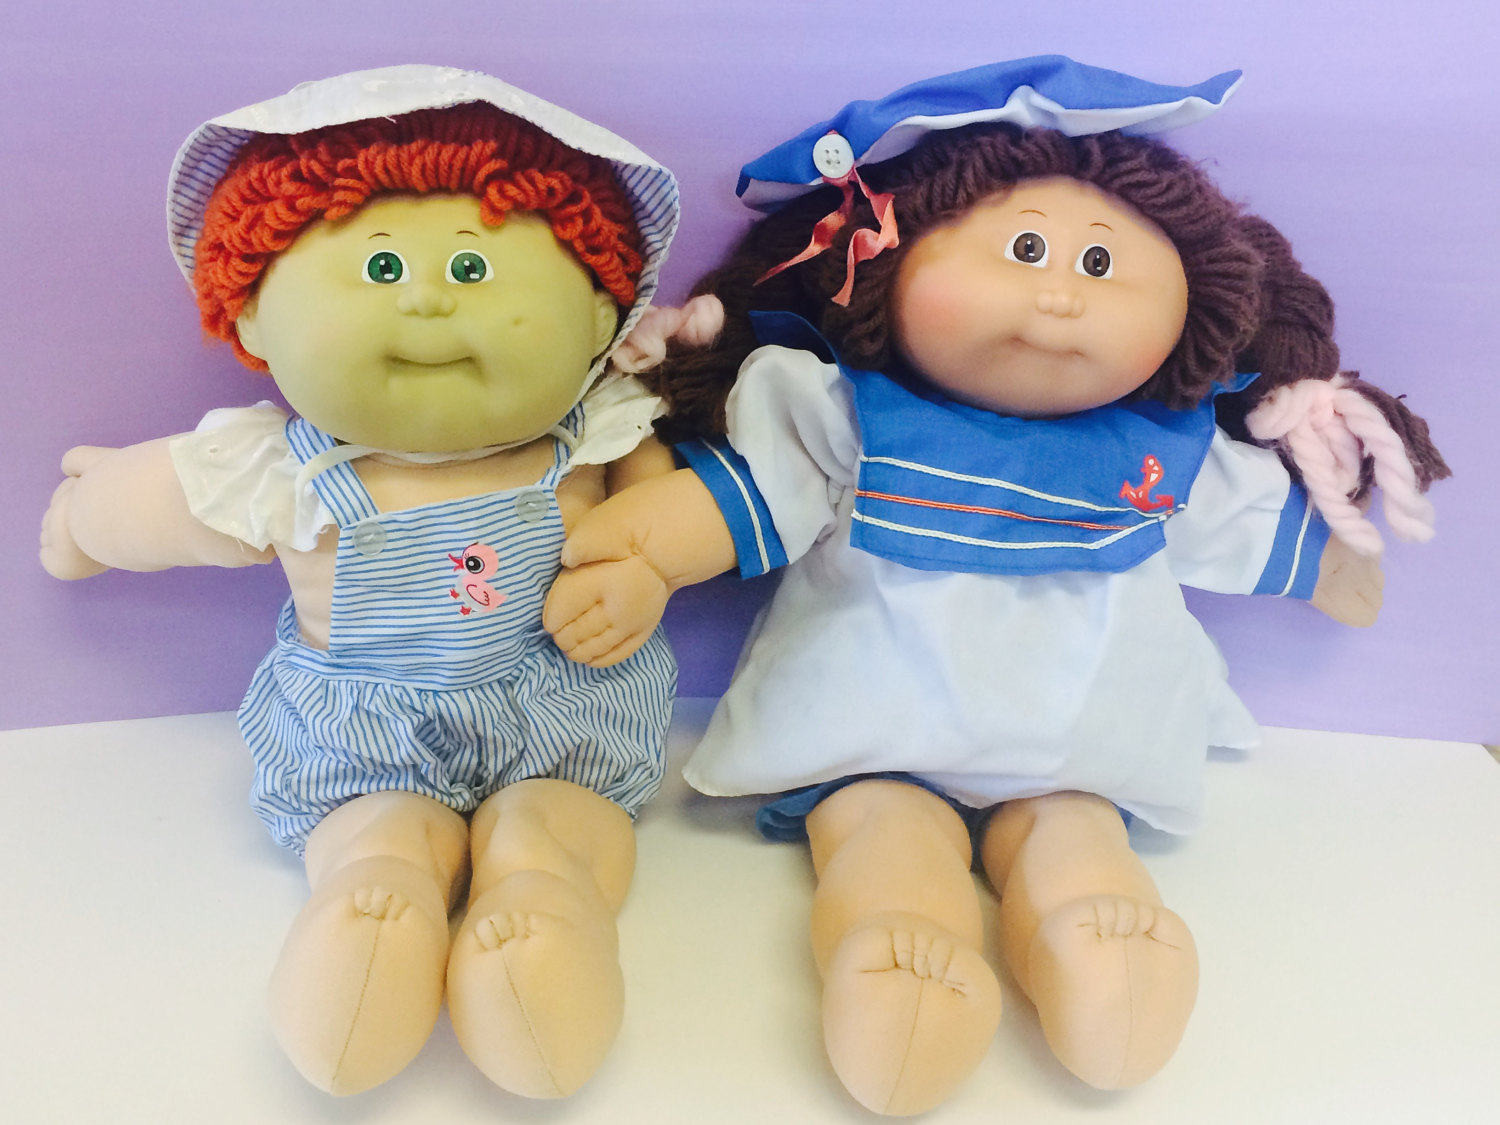 Cabbage Patch Kids Clothes
 Vintage Cabbage Patch Kids Clothing Doll Clothes Blue